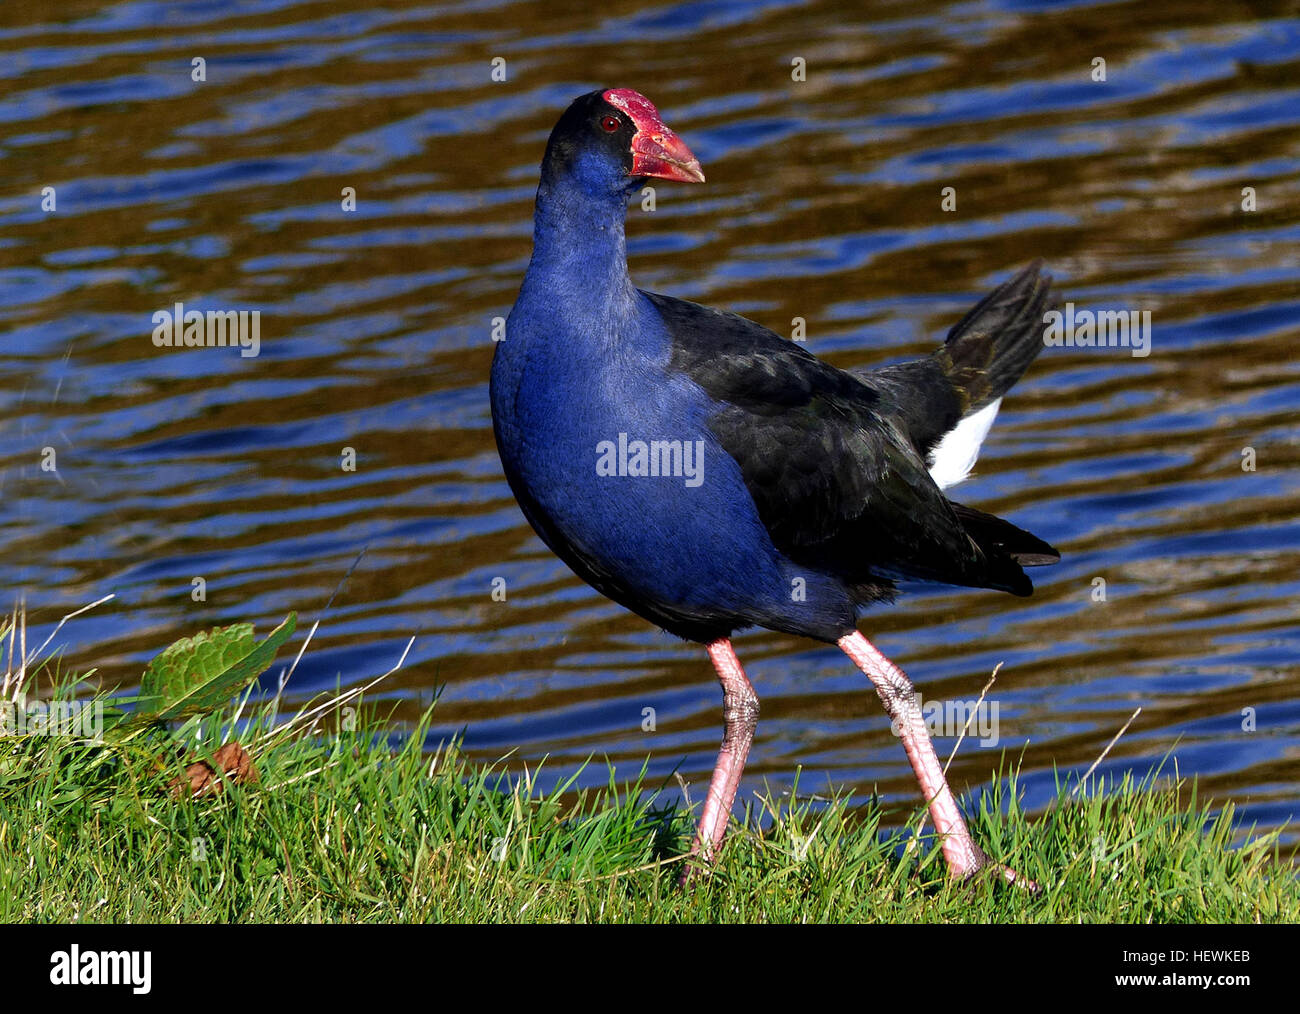 Pukeko is an extremely adaptable birds frequent many parts of New Zealand and are often seen on road sides and streams, wetlands, estuaries, short damp pasture. The male are about 50cm in height and weight about 1000 g and the female slightly smaller. They are deep blue with black head and upperparts. Their undertail is white. The bill and shield are scarlet; eyes are red. Their legs and feet areorange-red. Both sexes are alike. They can fly and swim, although not the most graceful bird in flight with legs dangling along behind them, and making loud squawking noises. They can run fast with tai Stock Photo